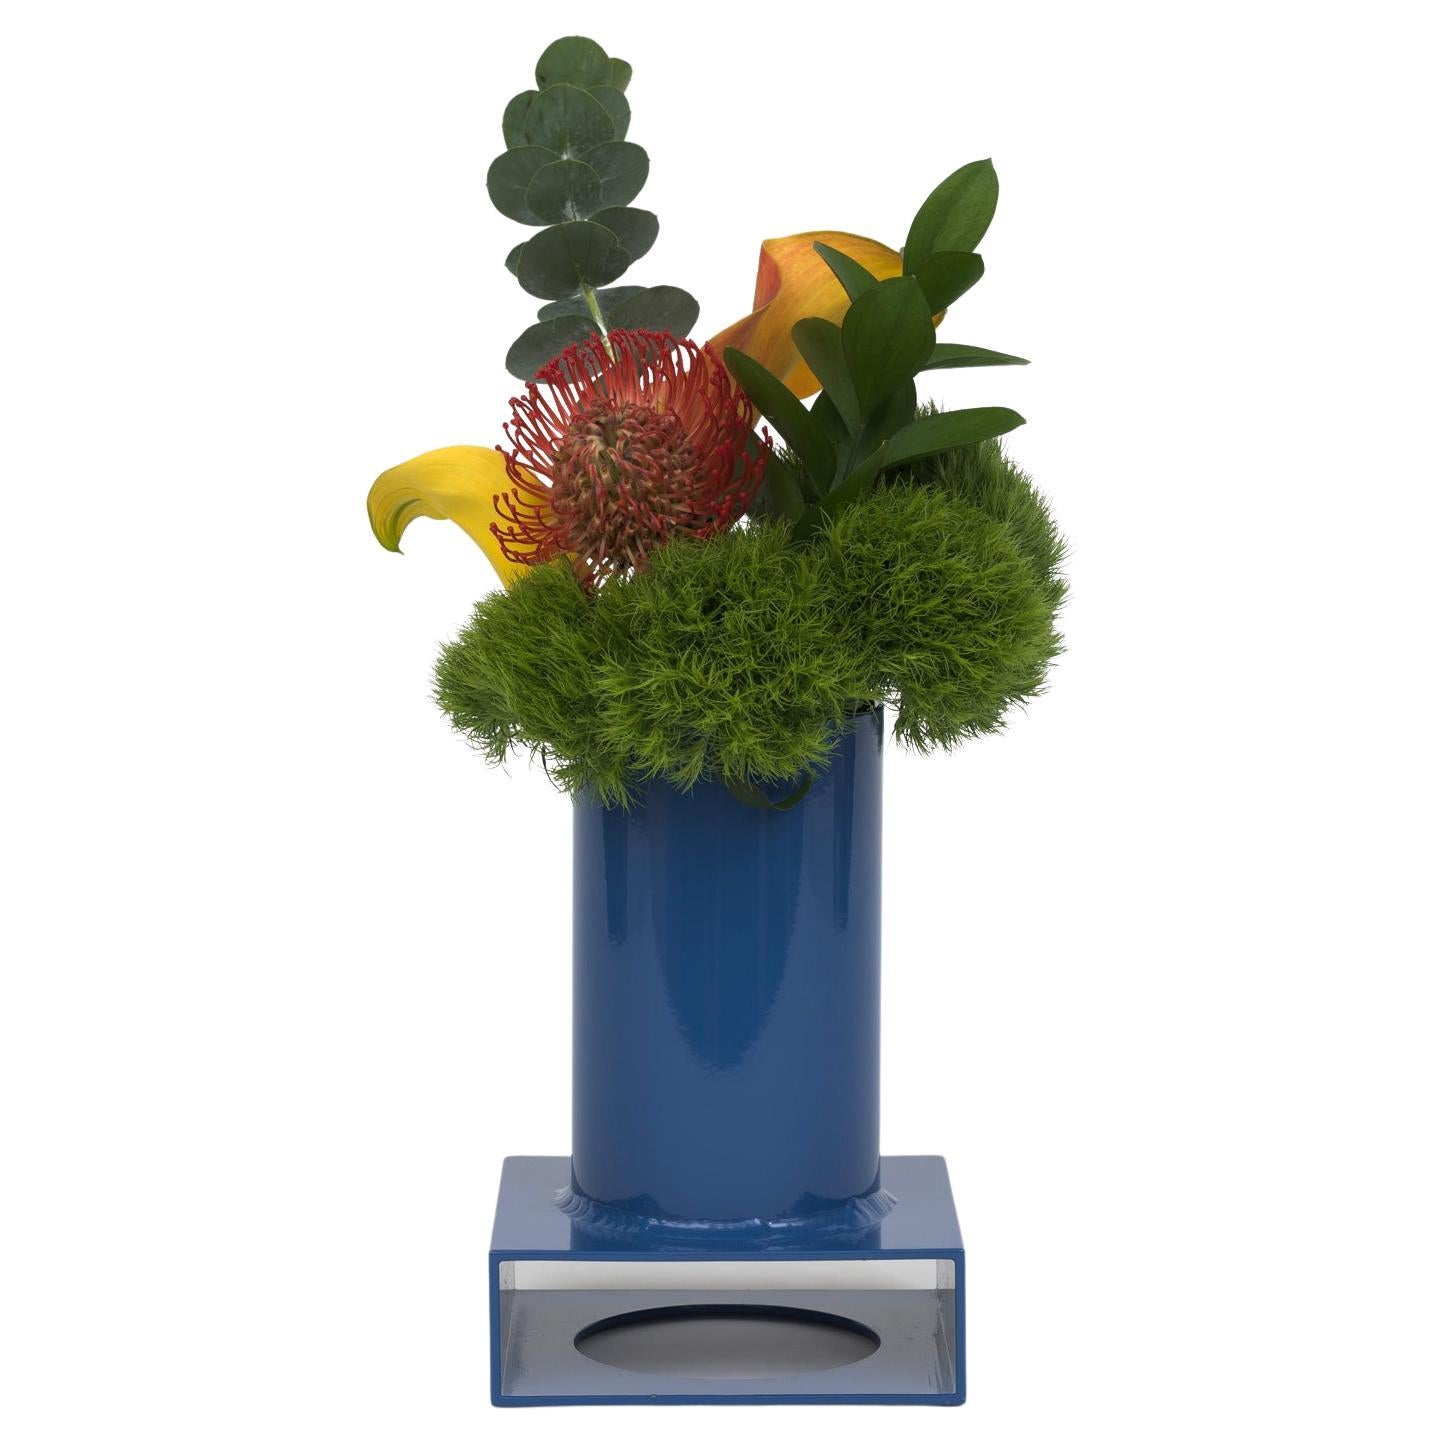 Brute Tube Vase 002 in Deep Adult Blue Powder-Coated Aluminum, Limited Edition For Sale